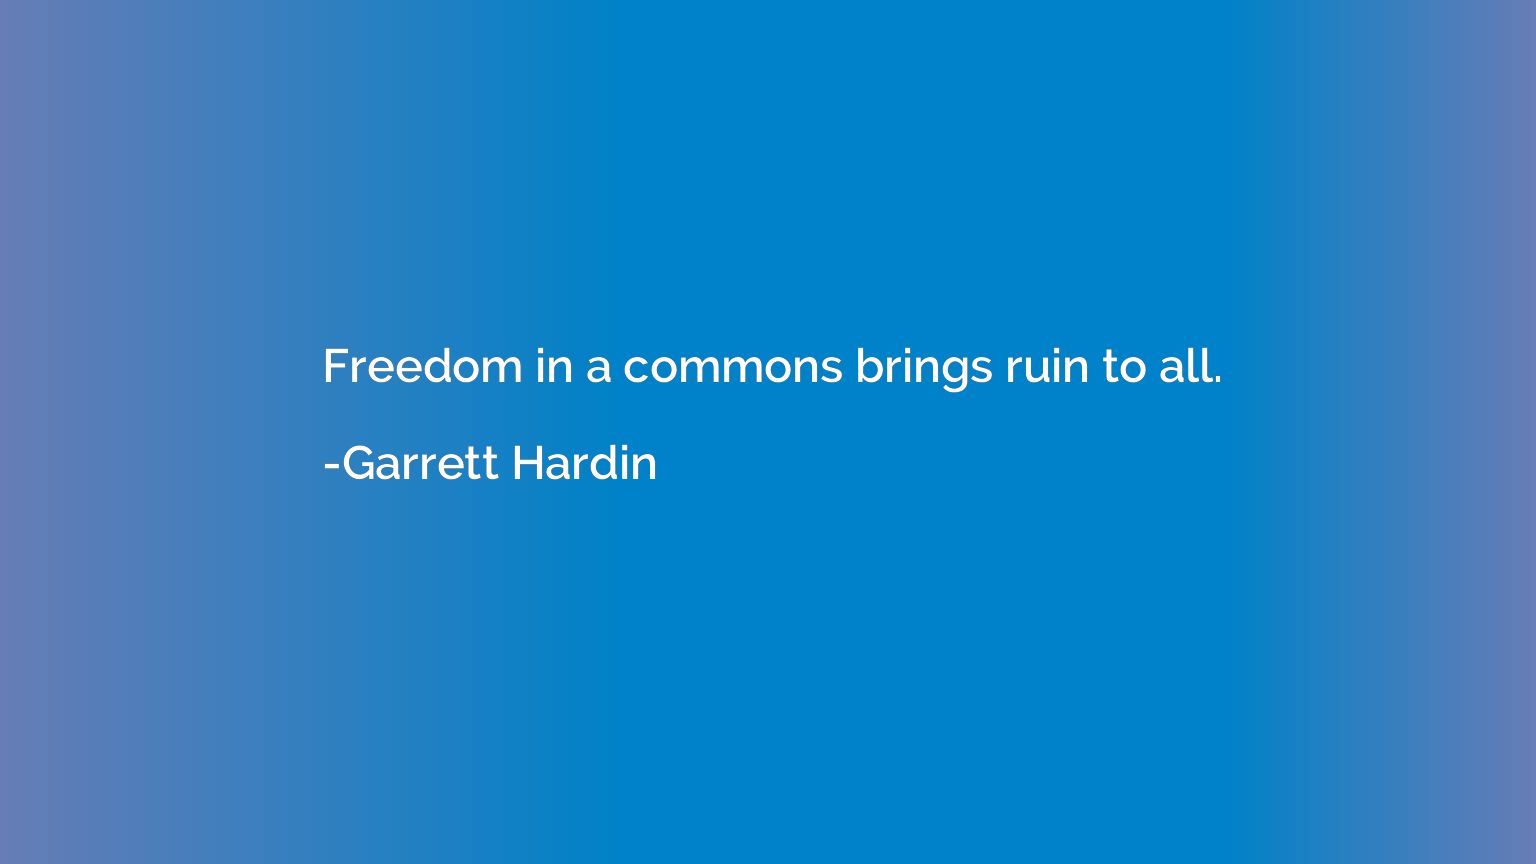 Freedom in a commons brings ruin to all.